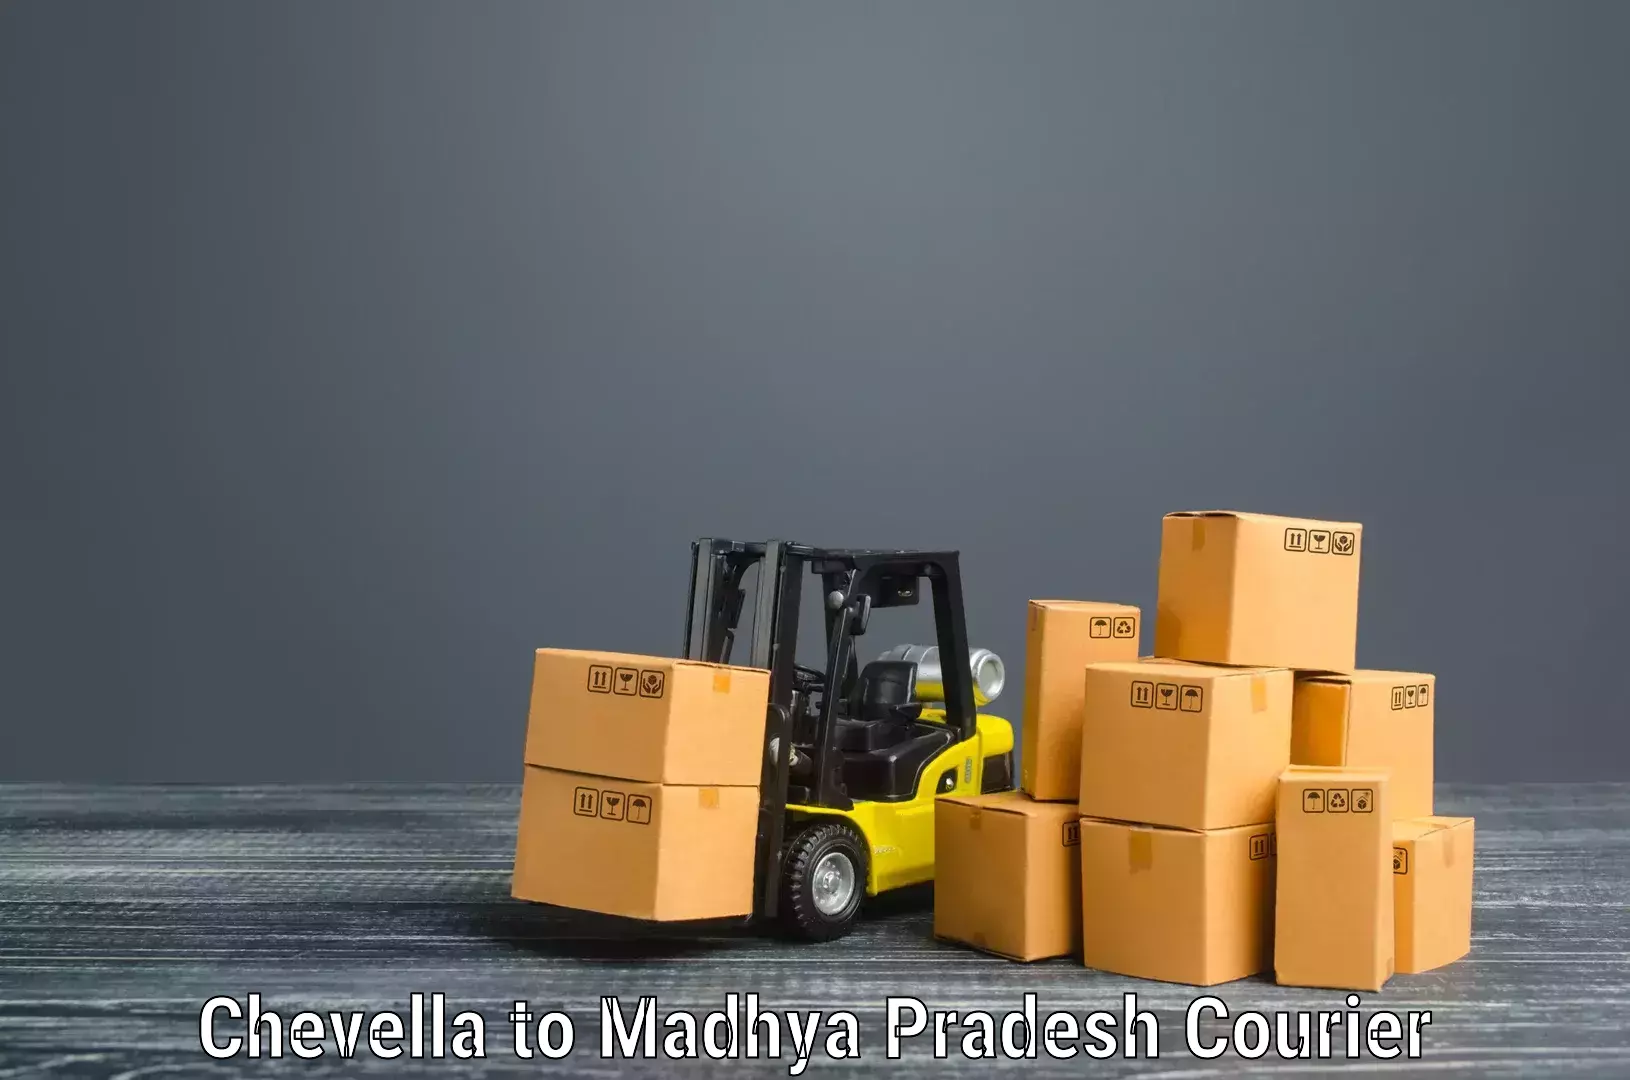 Expert goods movers Chevella to Dewas